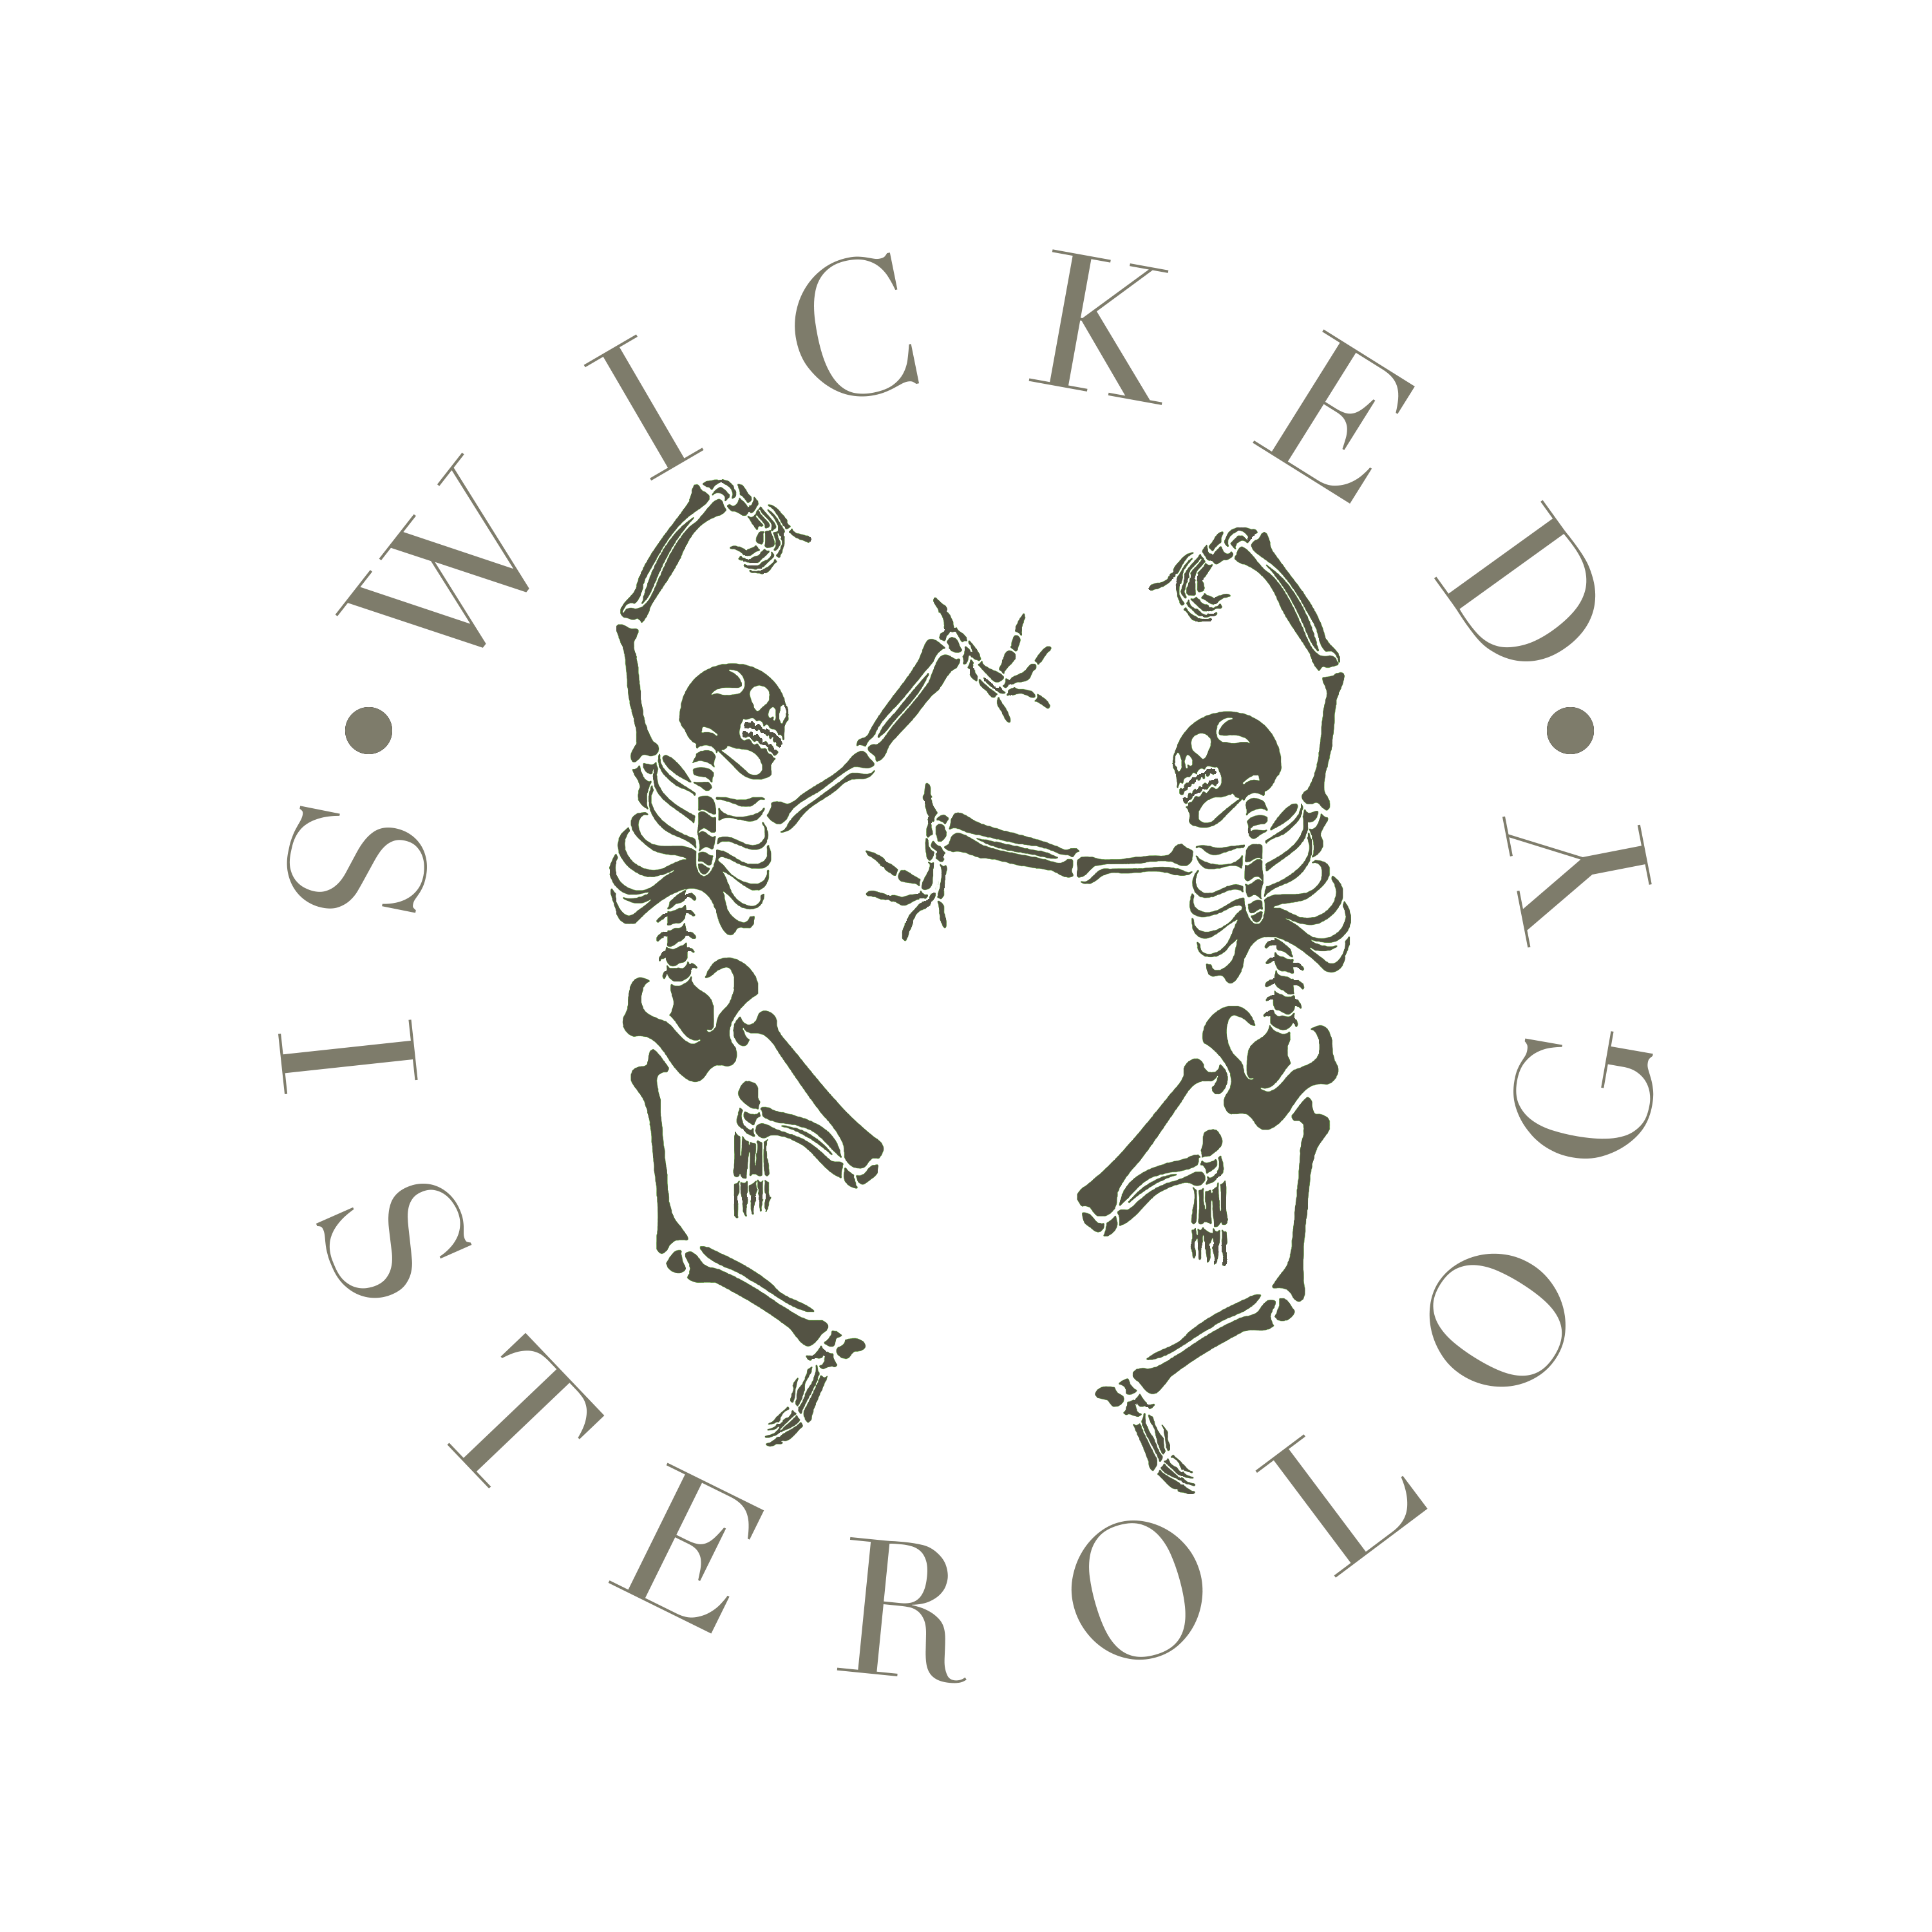 Wicked Sisterology